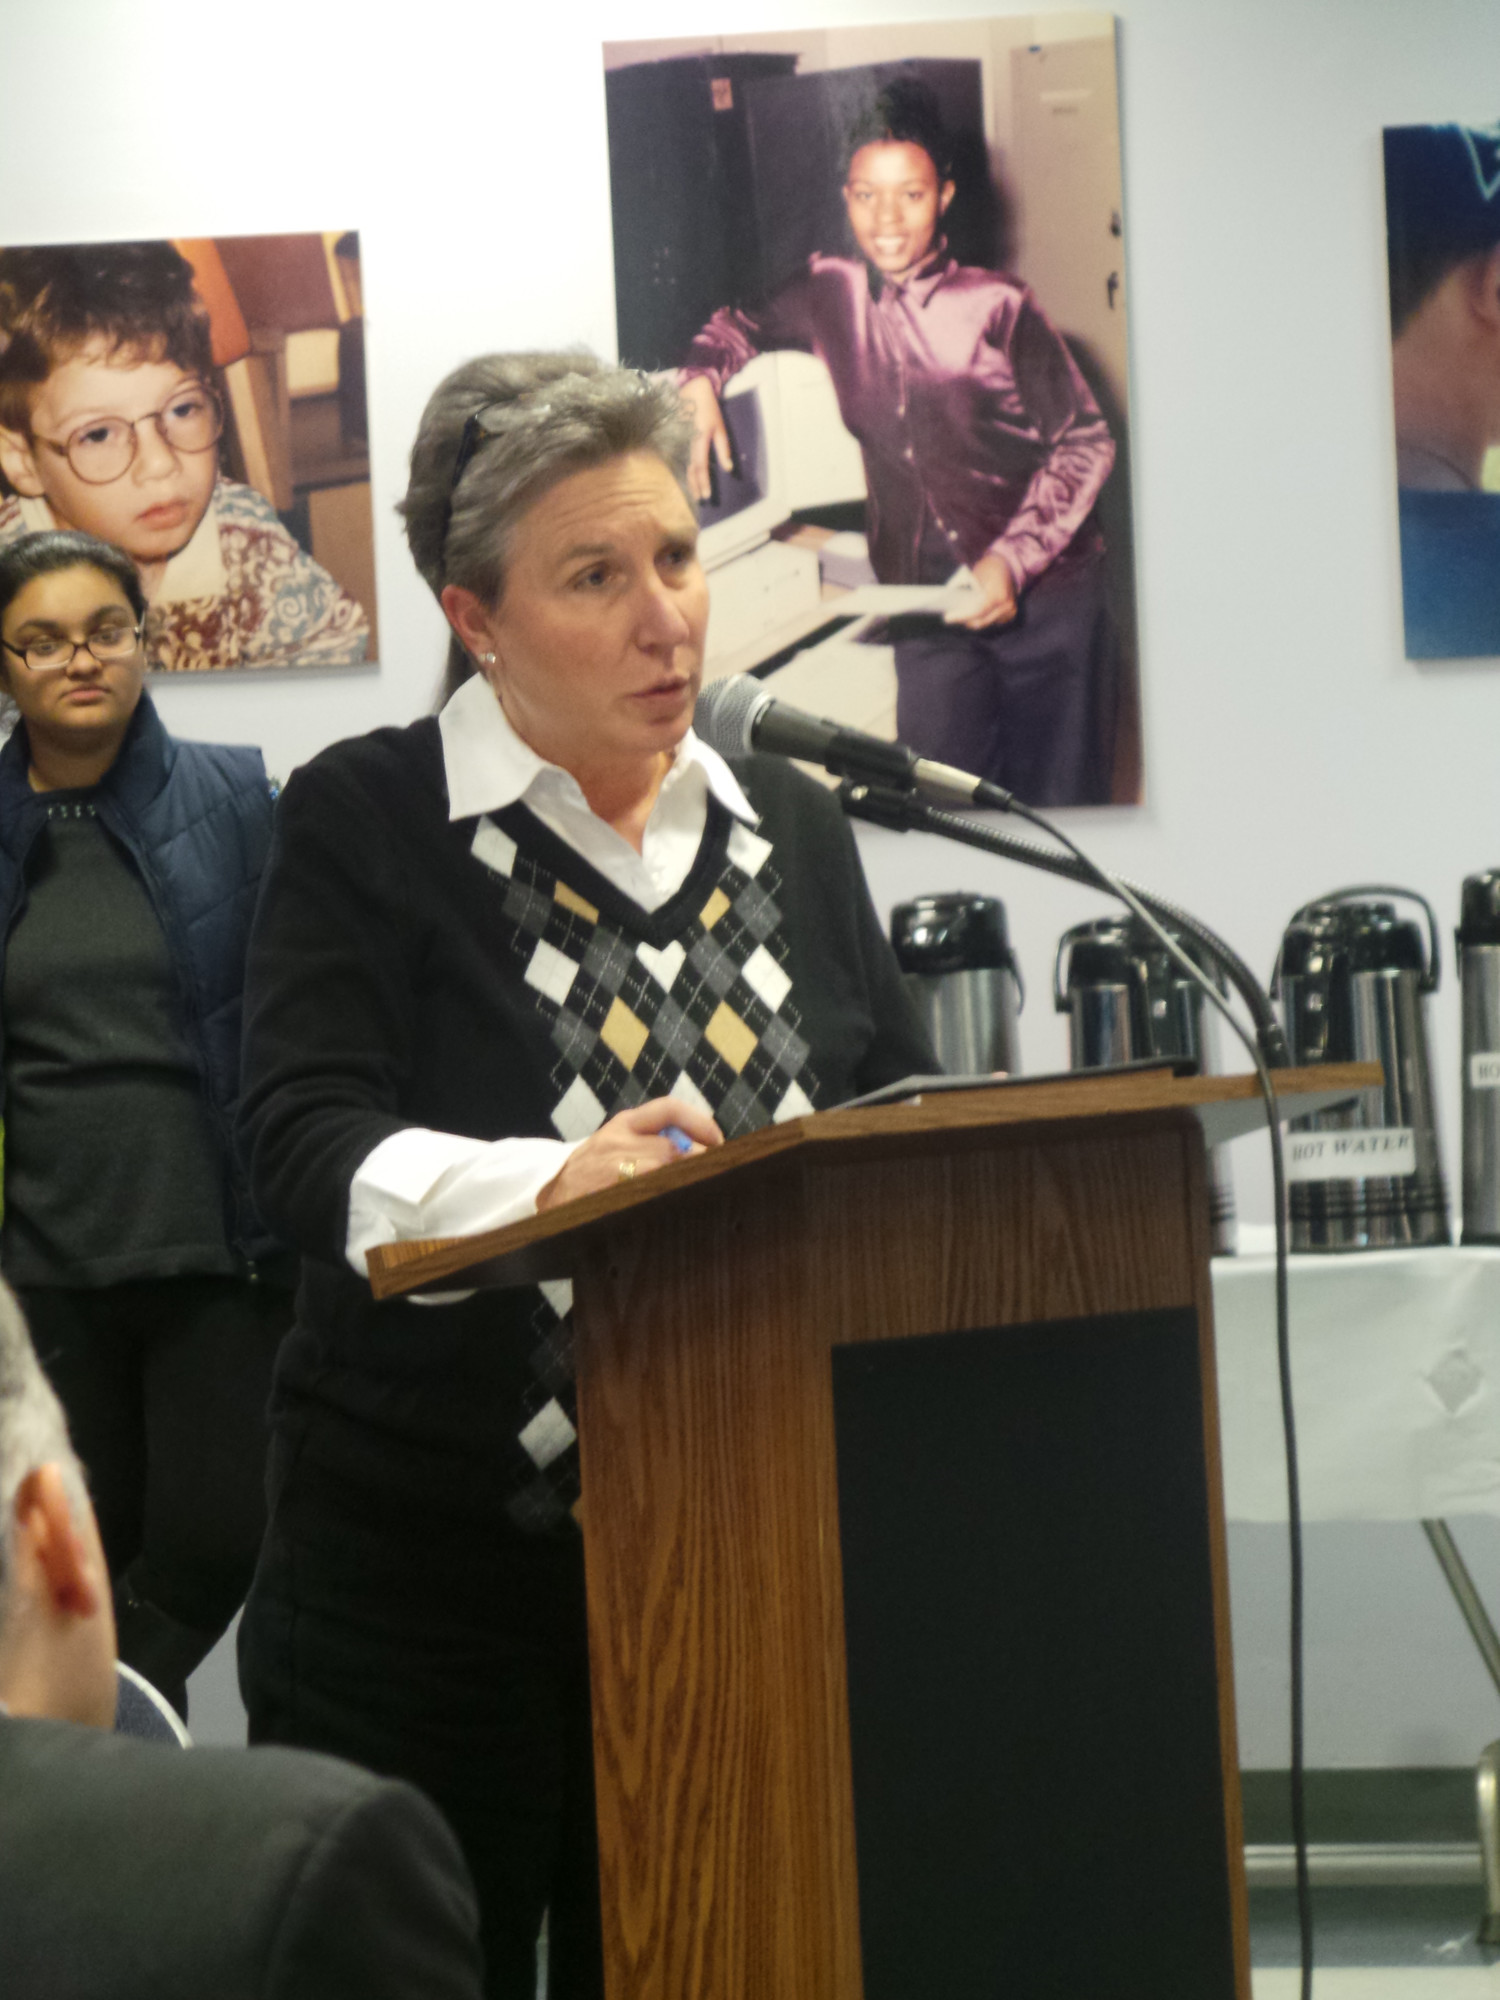 Josephine Bottitta, president of Malverne’s Board of Education, made an appeal to the board.